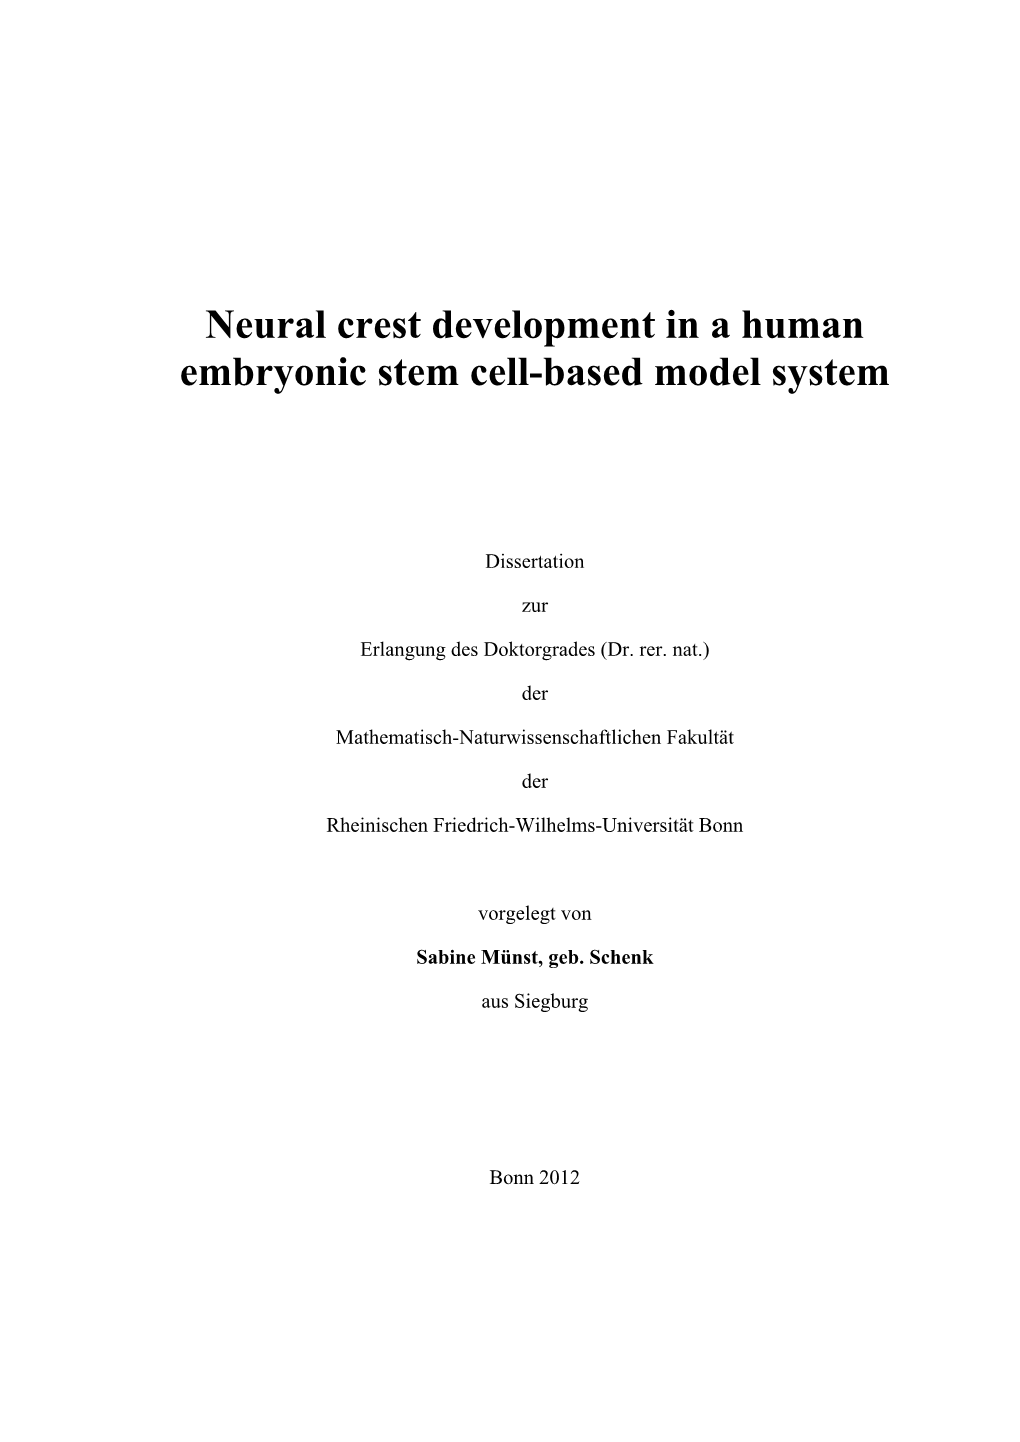 Neural Crest Development in a Human Embryonic Stem Cell-Based Model System